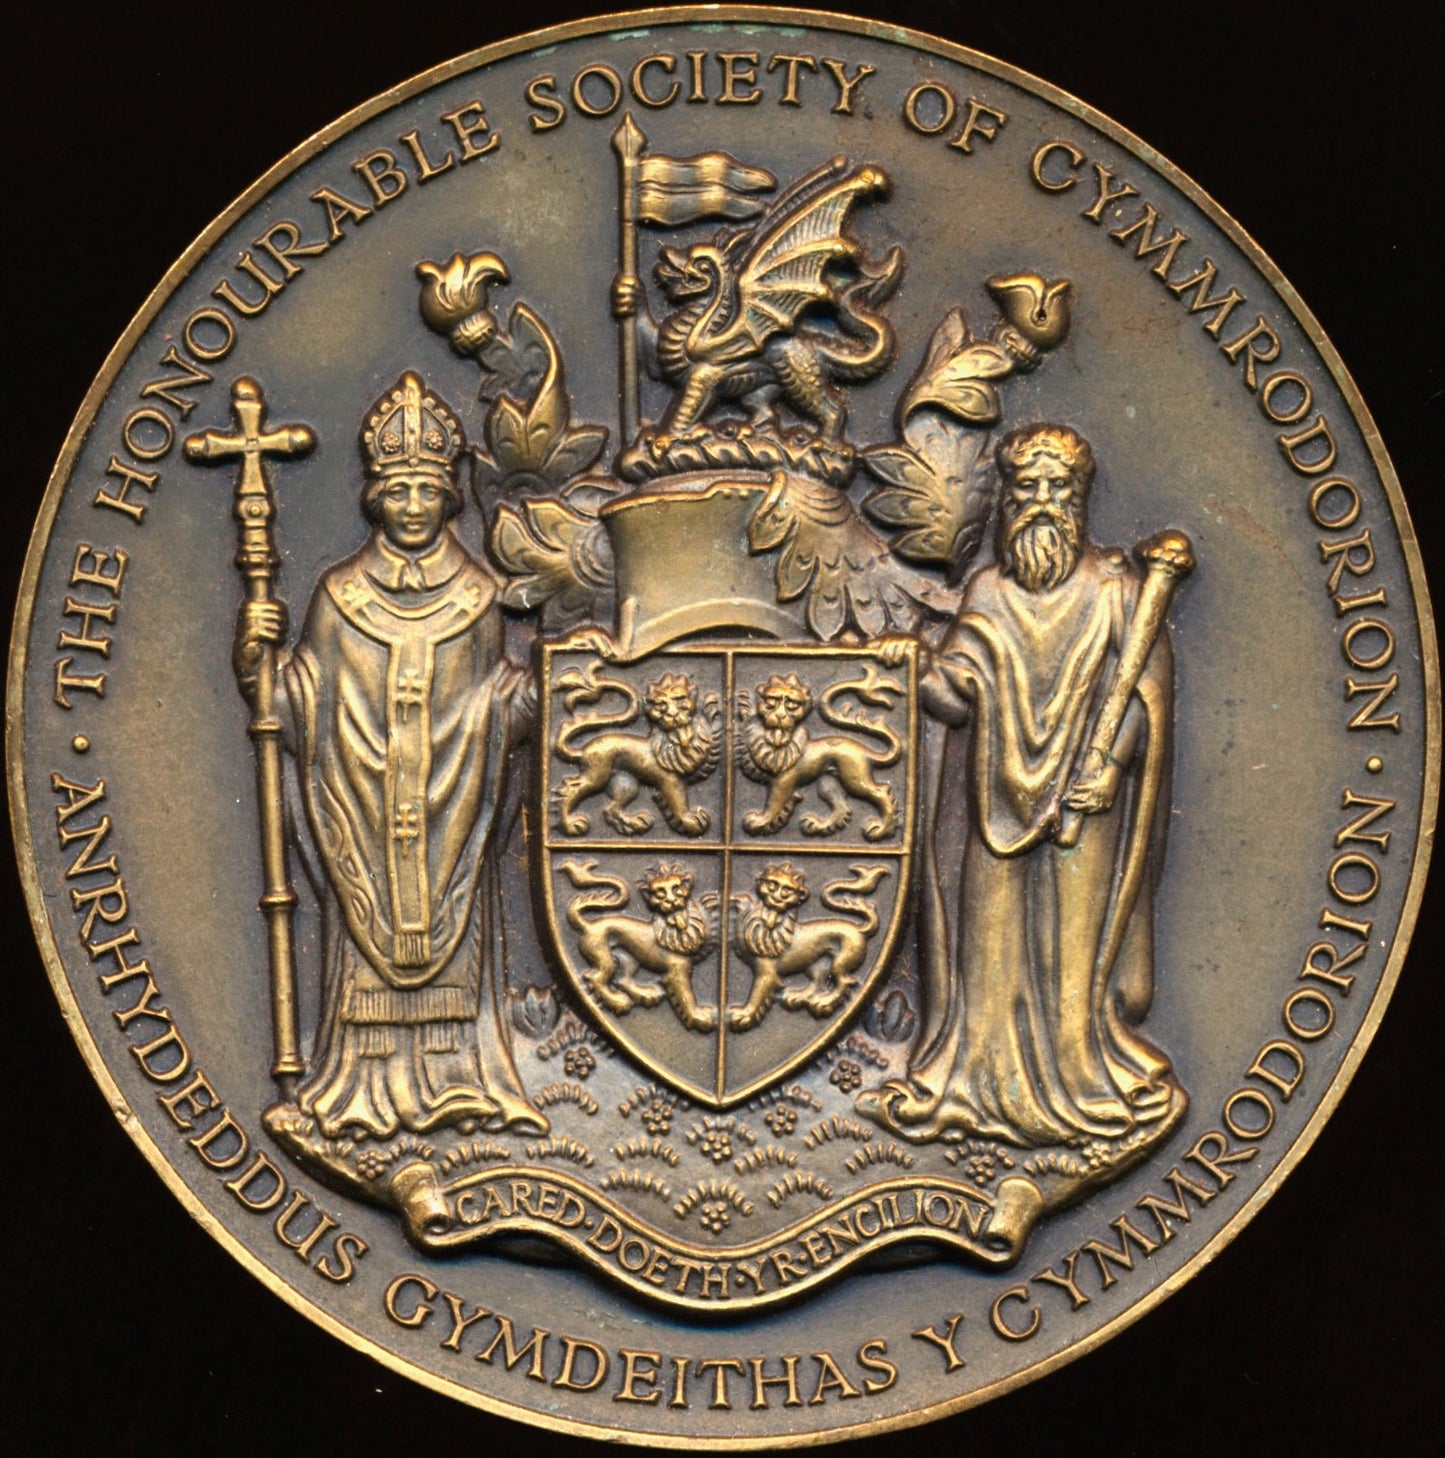 1883 (c) Honourable Society Of Cymmrodorion 63mm oxidised bronze medal